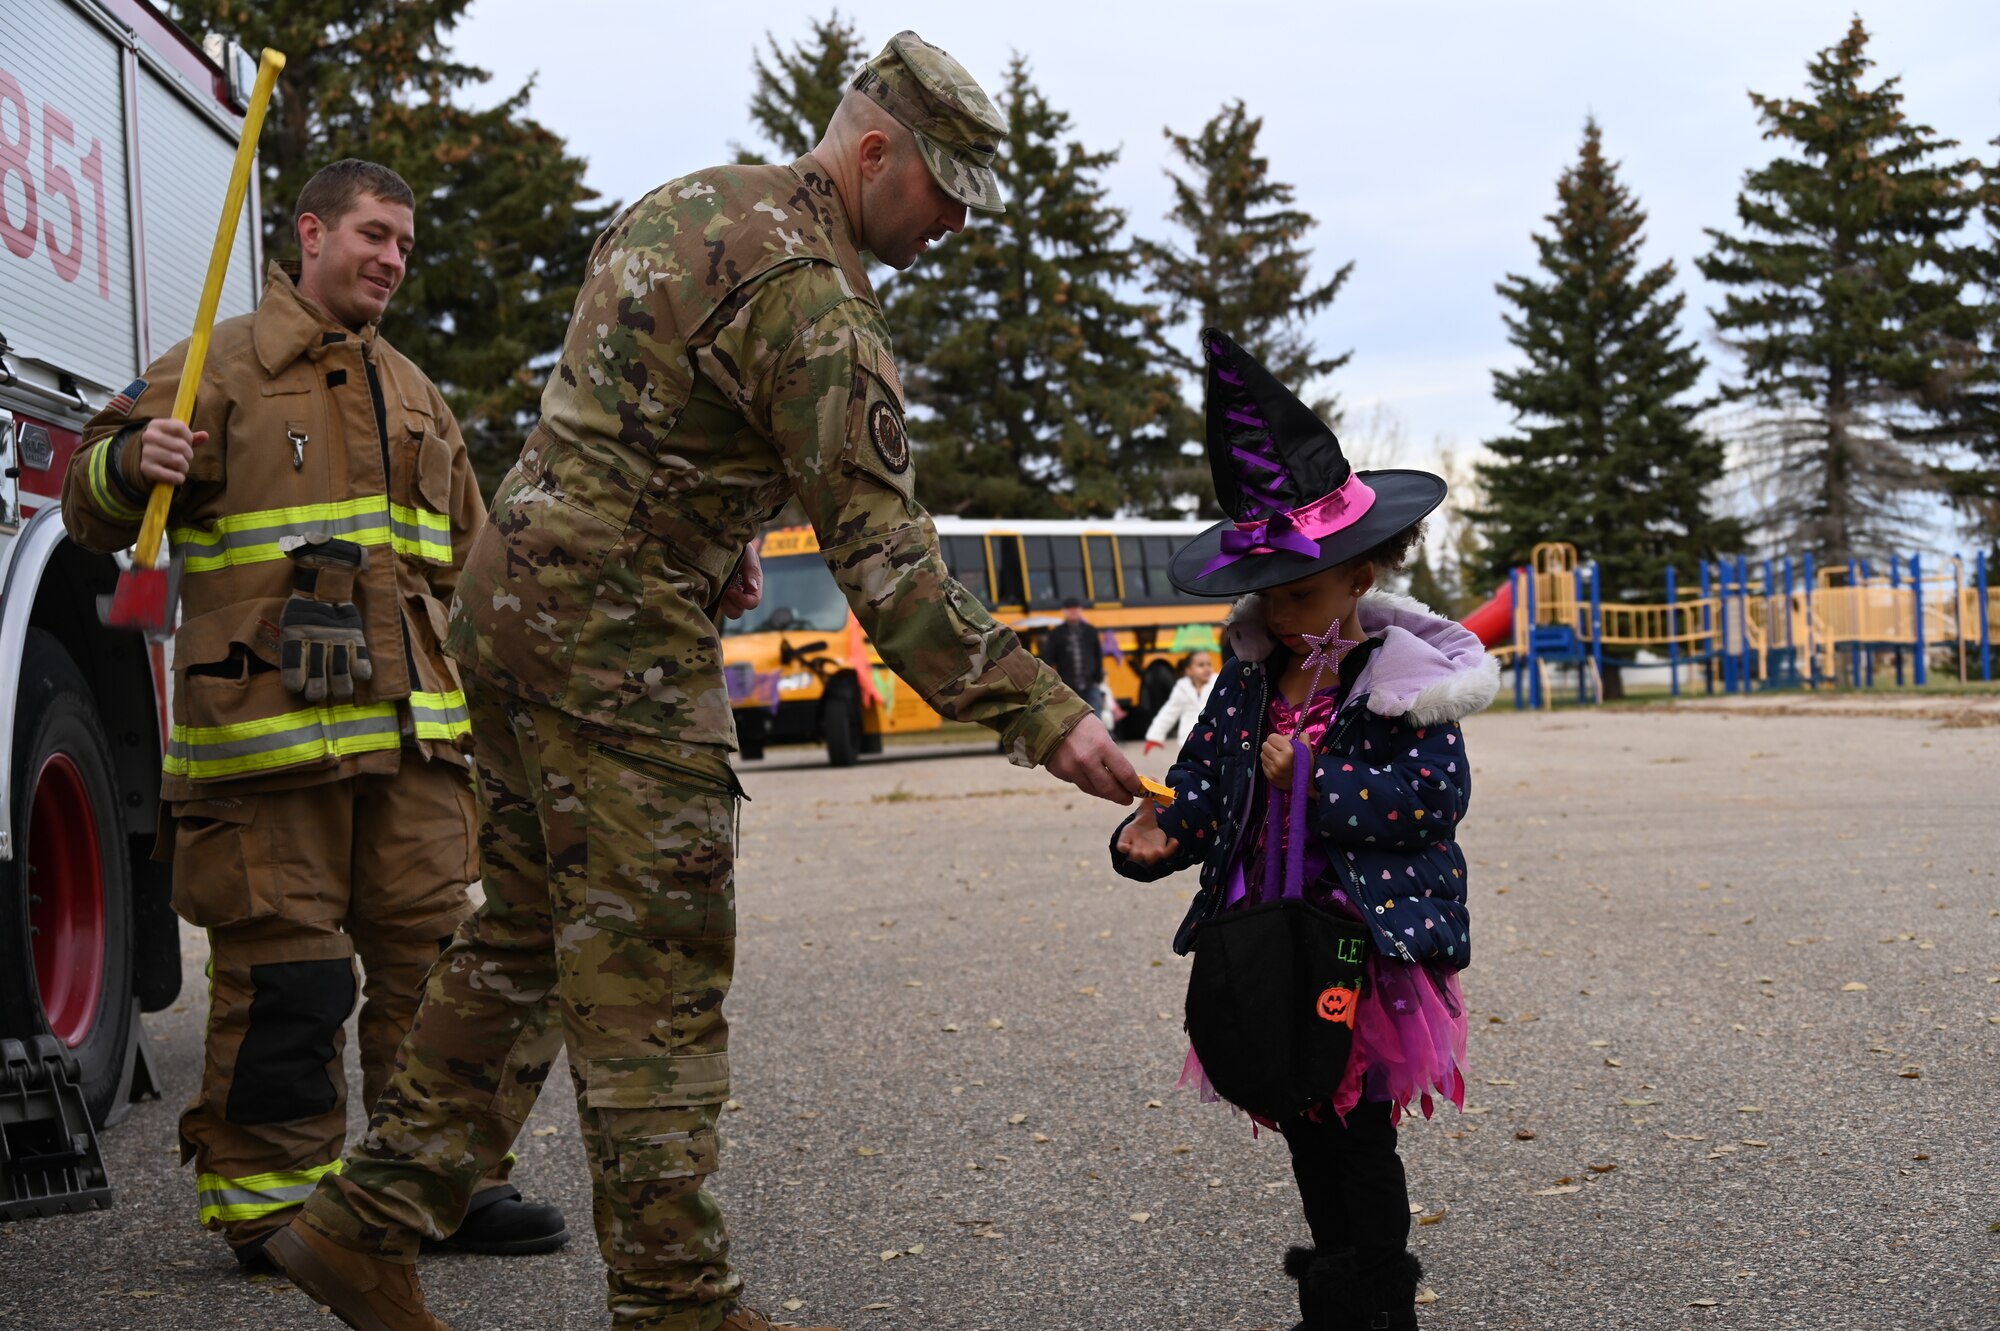 Volunteers from the 5th Force Support Squadron at Minot Air Force Base, North Dakota, host Spooky-Con Oct. 28, 2022. The volunteers provided candy and festive activities to the families on base. (U.S. Air Force photo by Senior Airman Zachary Wright)